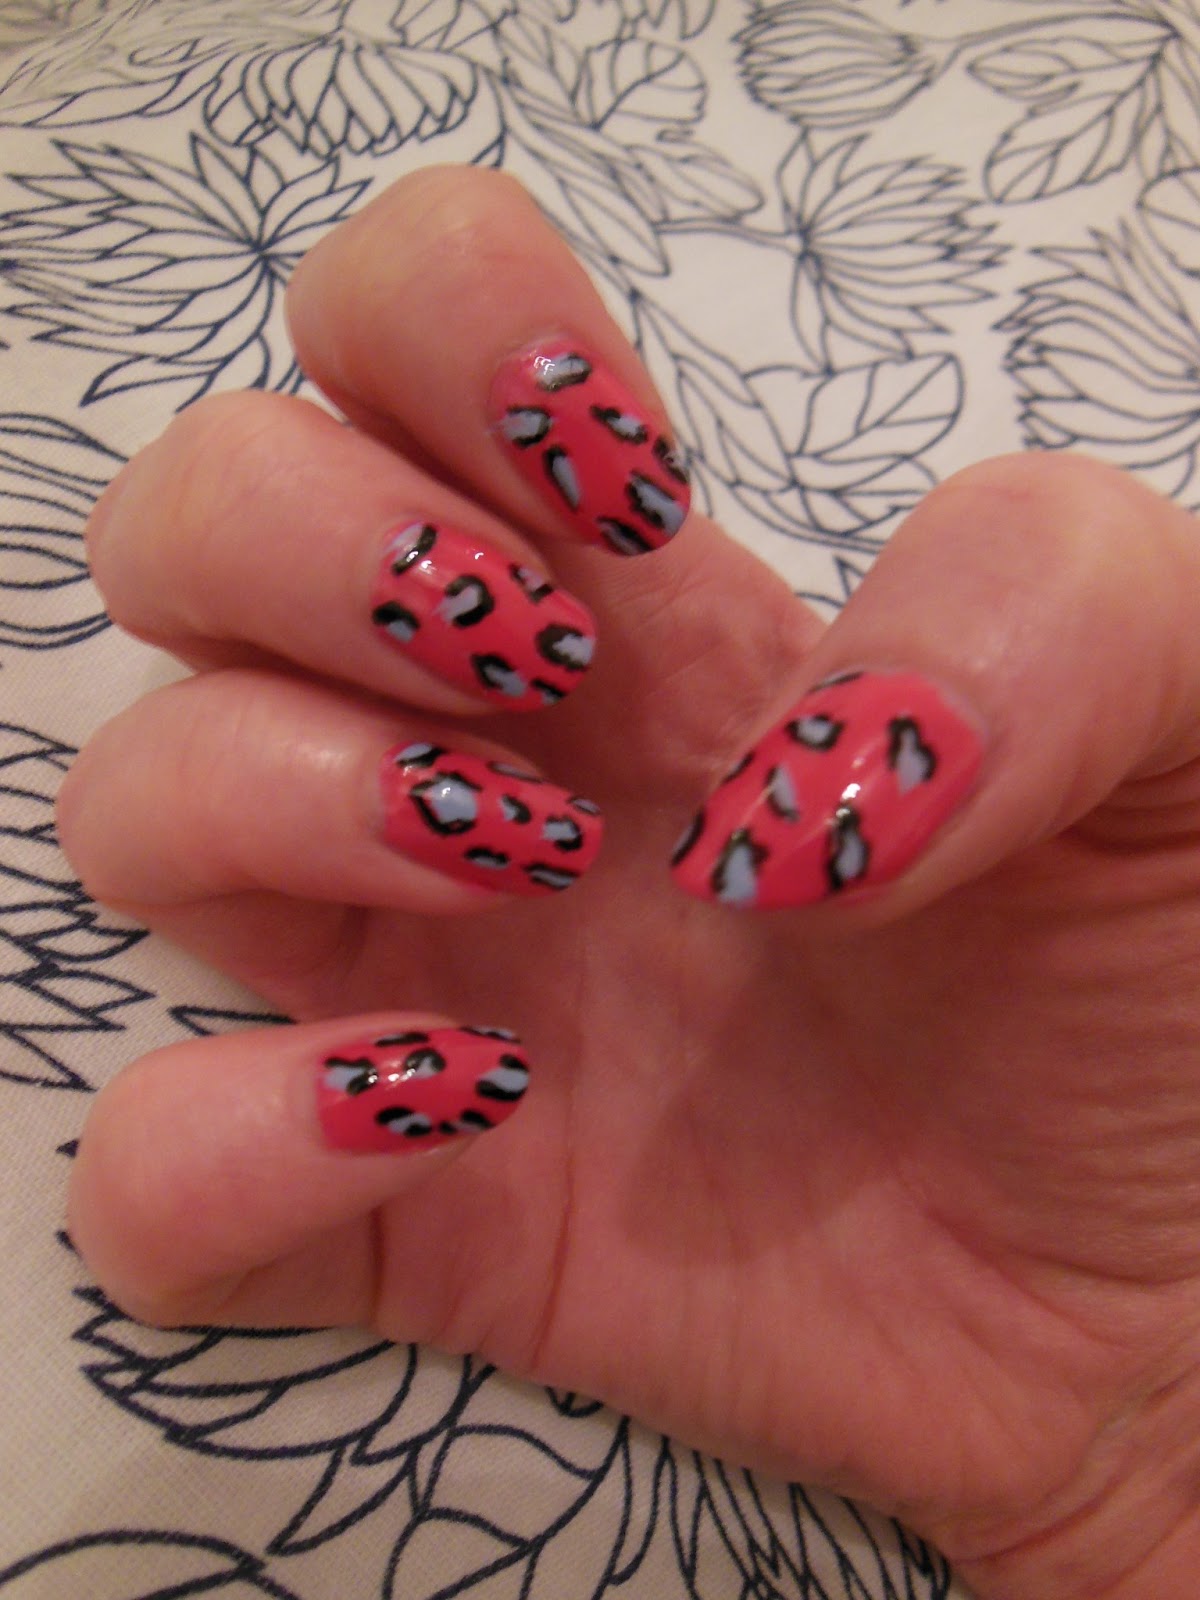 How to: Leopard print nail art | Tales of a Pale Face | UK beauty blog